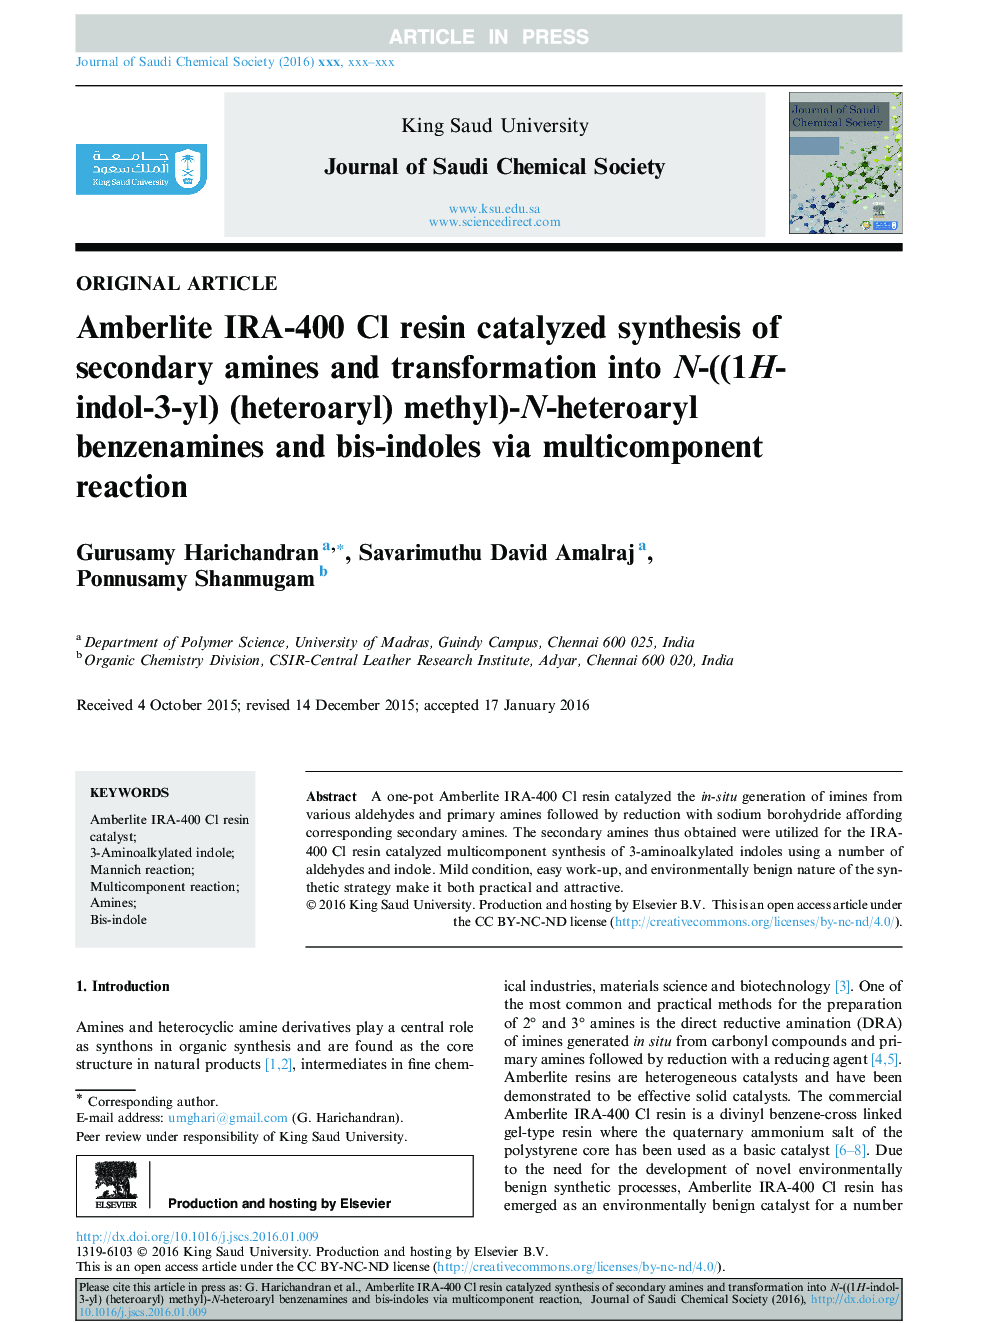 Amberlite IRA-400 Cl resin catalyzed synthesis of secondary amines and transformation into N-((1H-indol-3-yl) (heteroaryl) methyl)-N-heteroaryl benzenamines and bis-indoles via multicomponent reaction